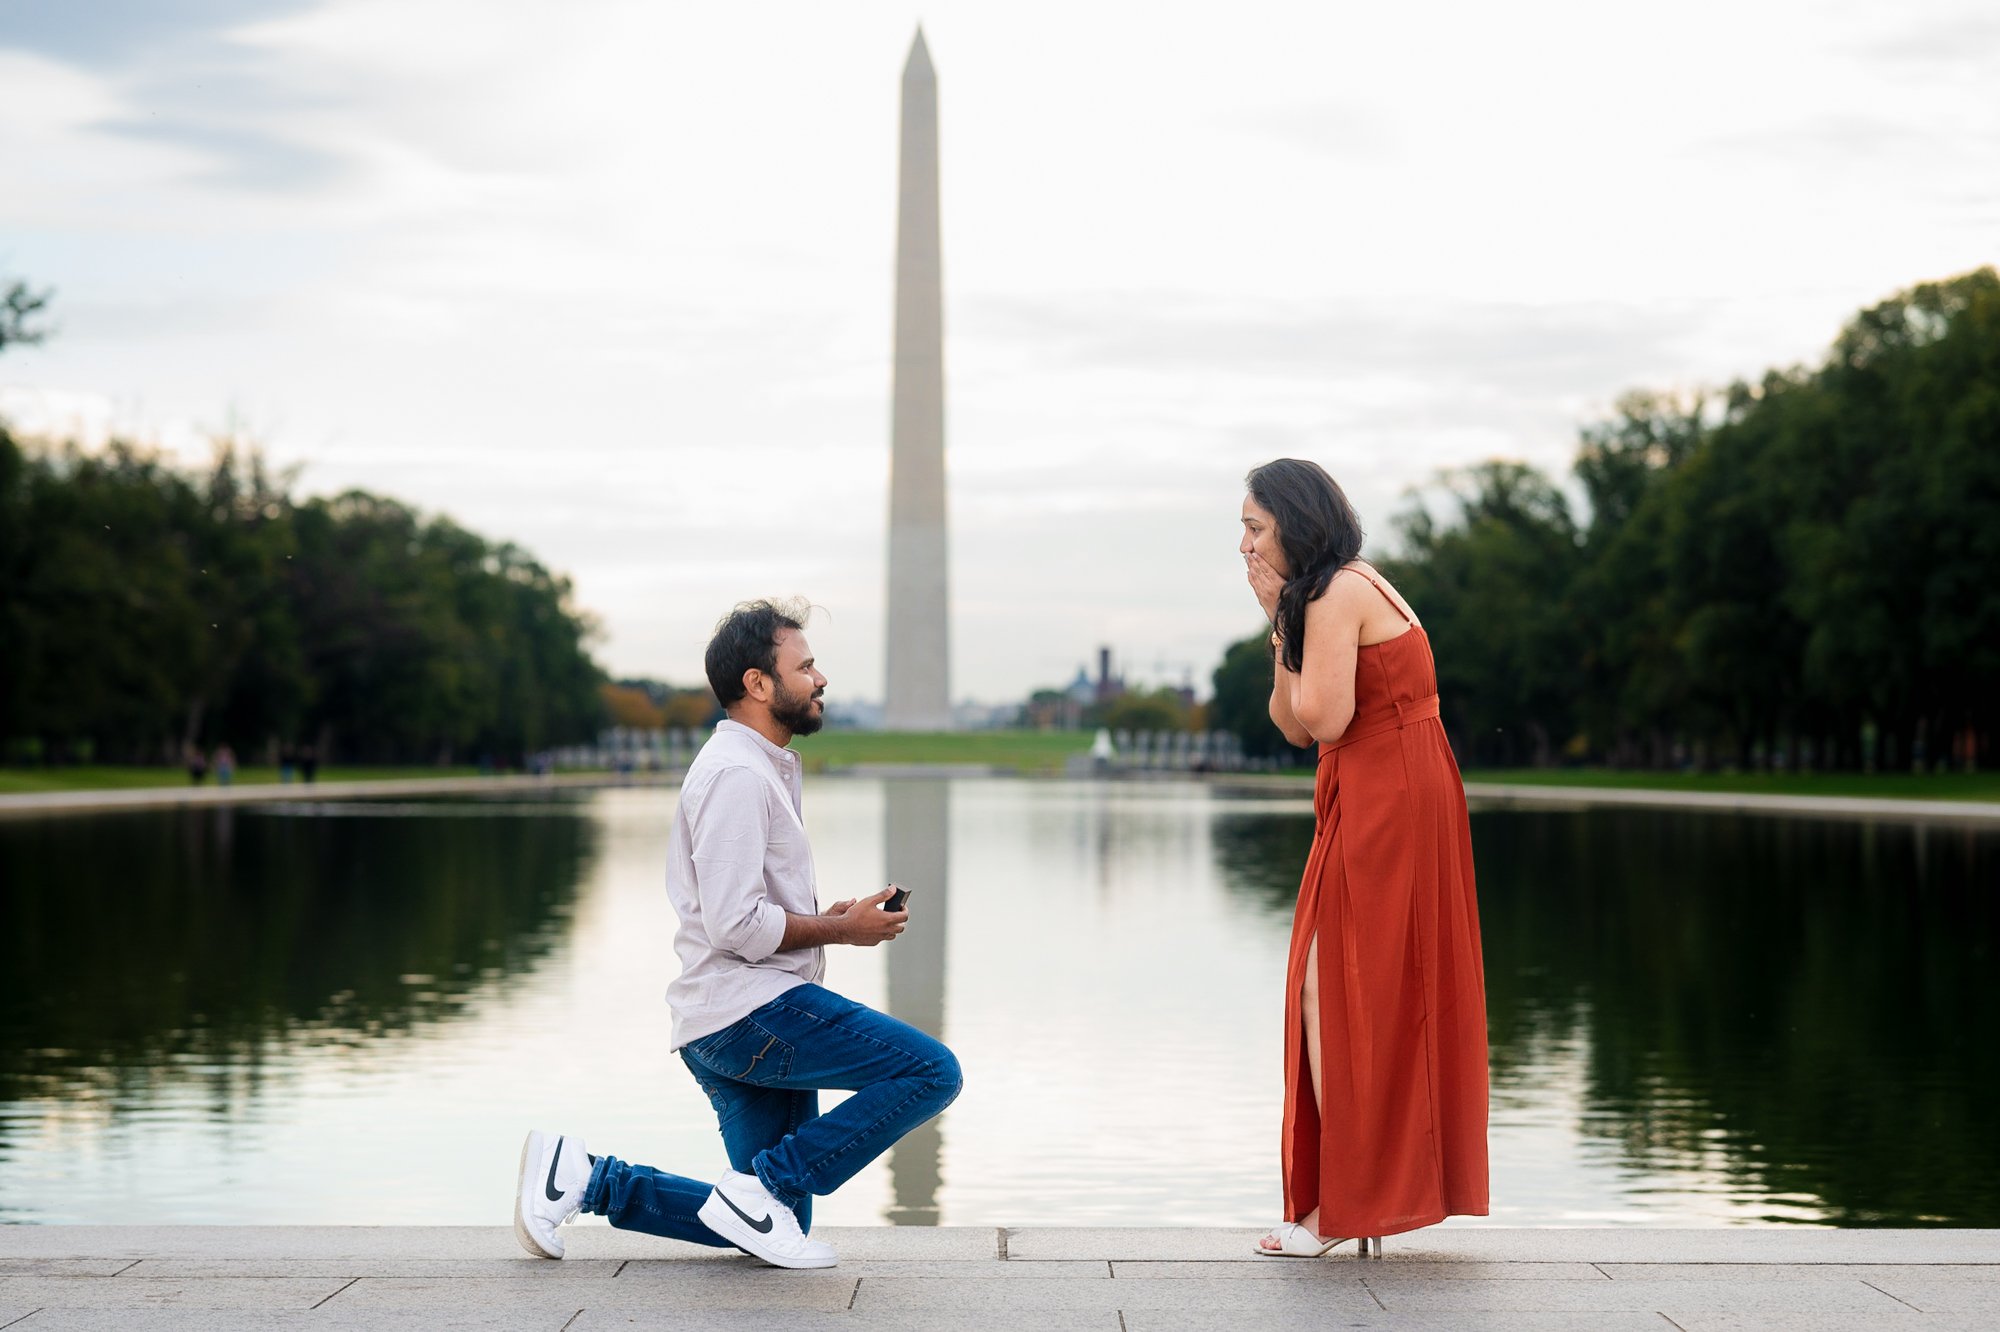 Lincoln memorial engagement photos Mantas Kubilinskas captured real moments of couple having great time at their photoshoot and proposal-9.jpg